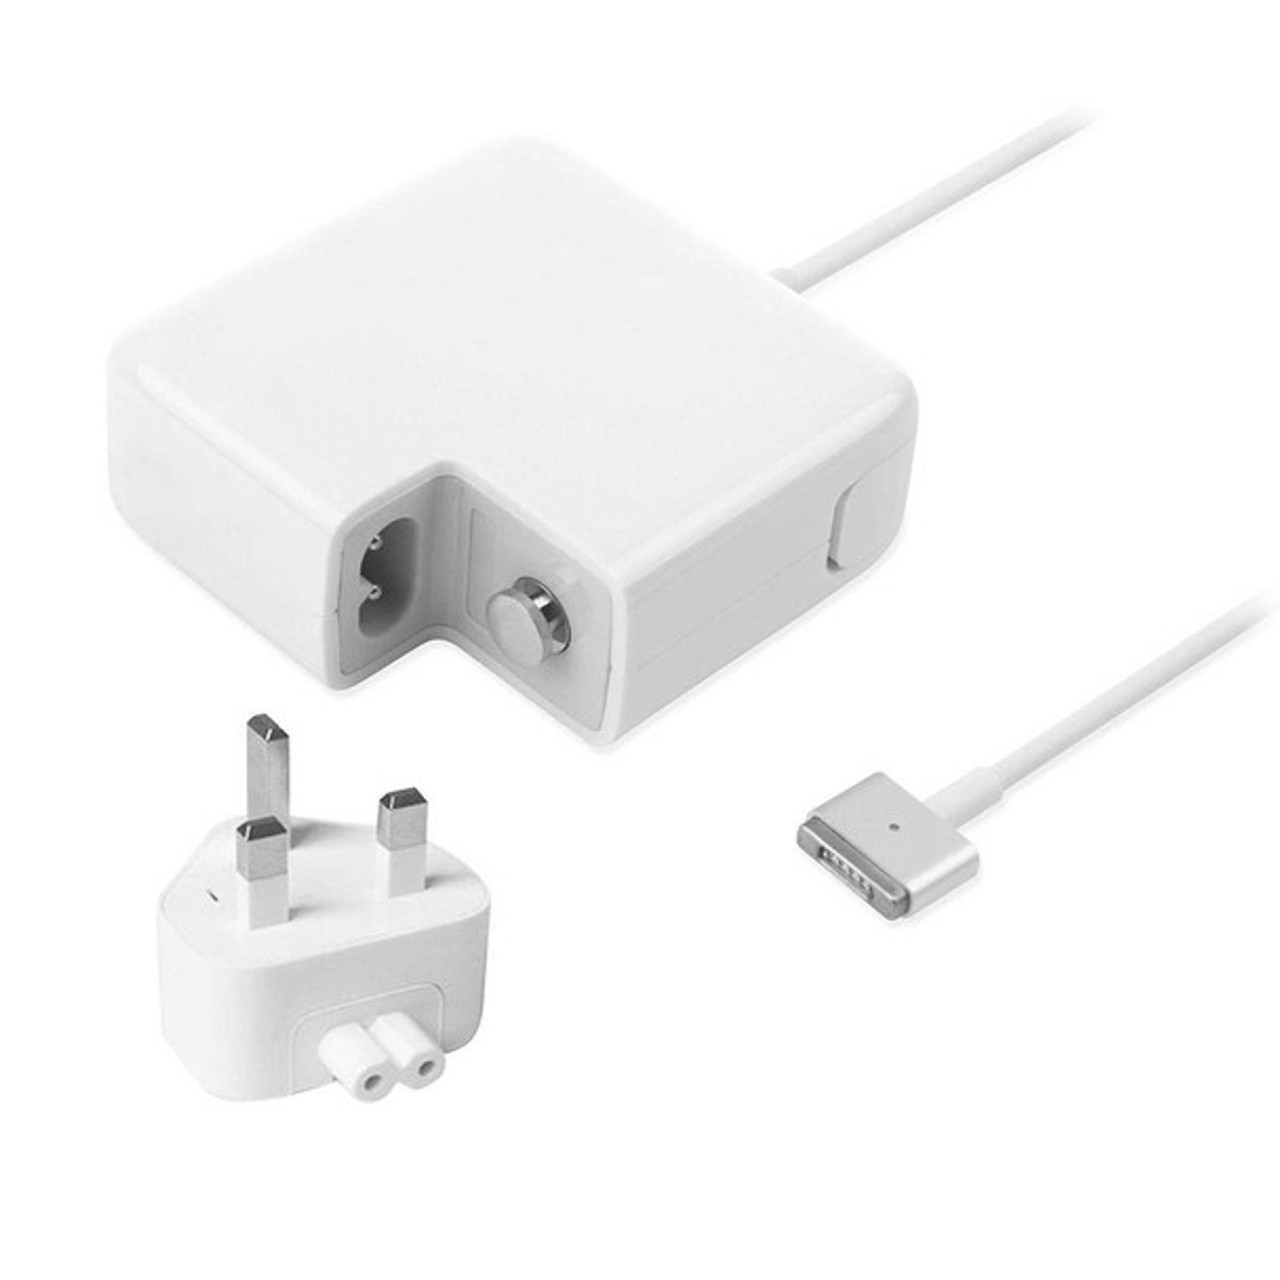 60W Magsafe 2 - Charger Compatible for Apple Macbook | 16.5V - 3.65A